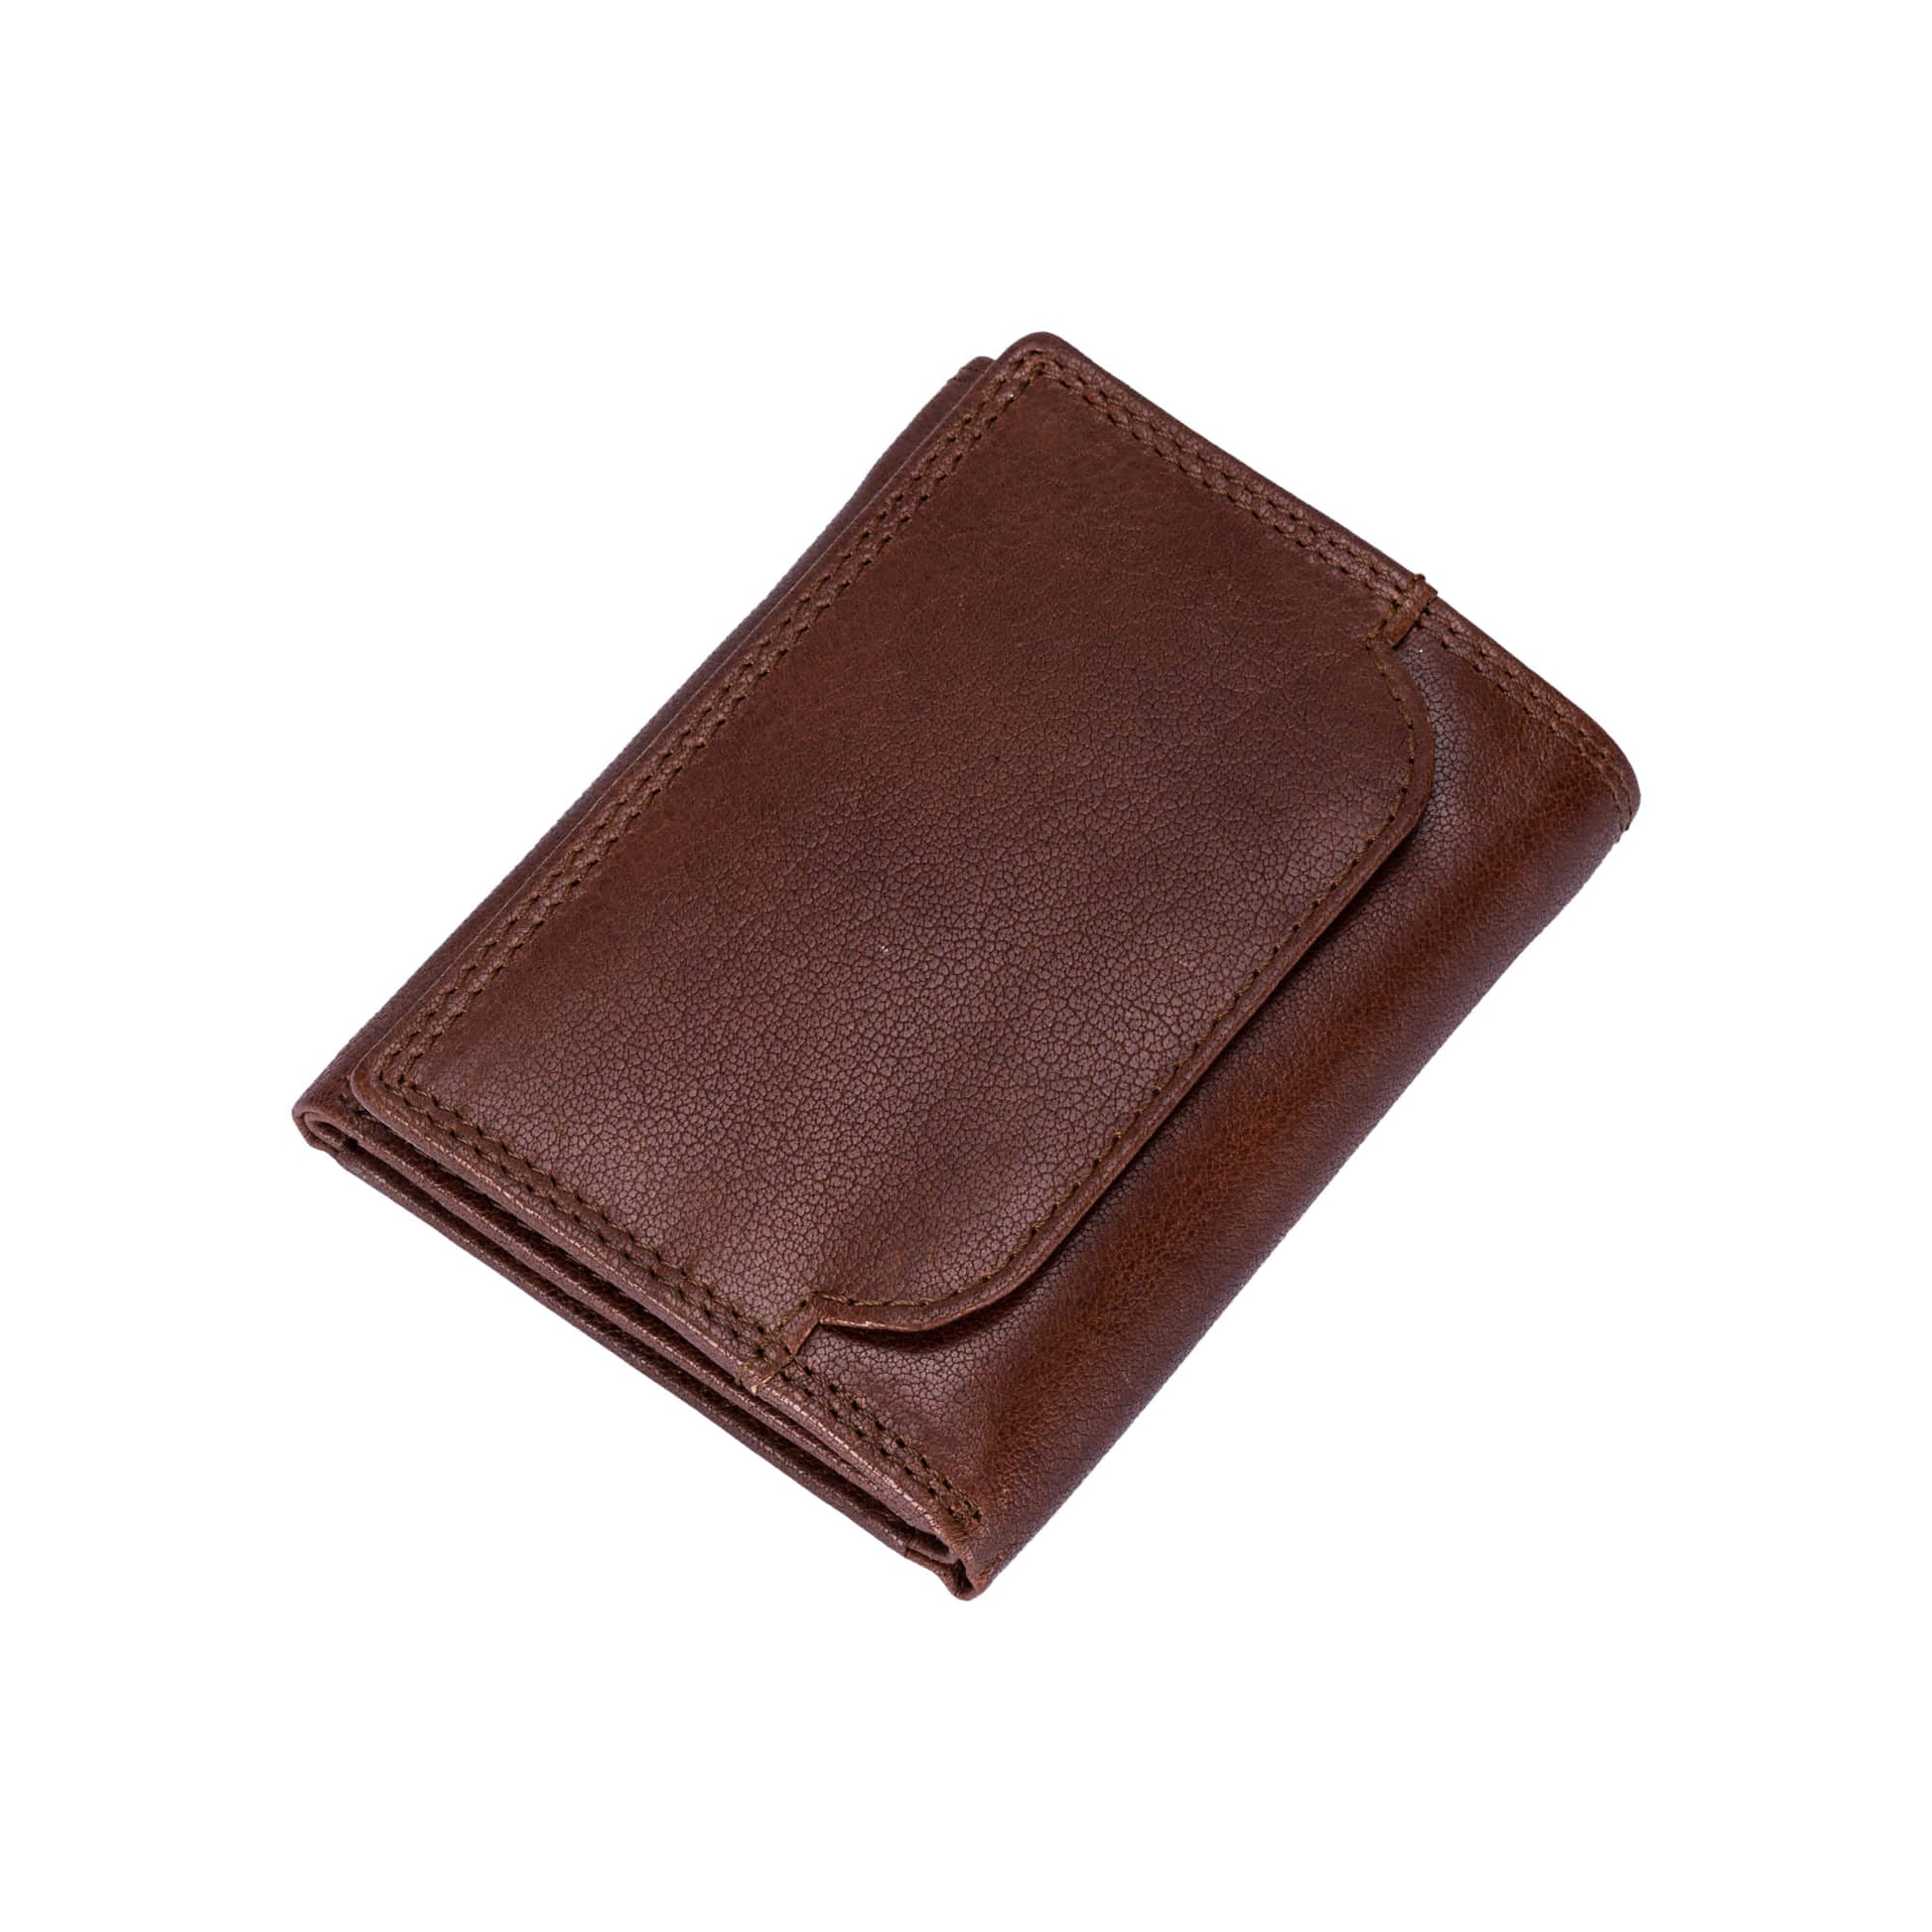 Style n Craft 301791 Trifold Wallet in Vintage Full Grain Leather - brown color - front angled view  showing the outside pocket